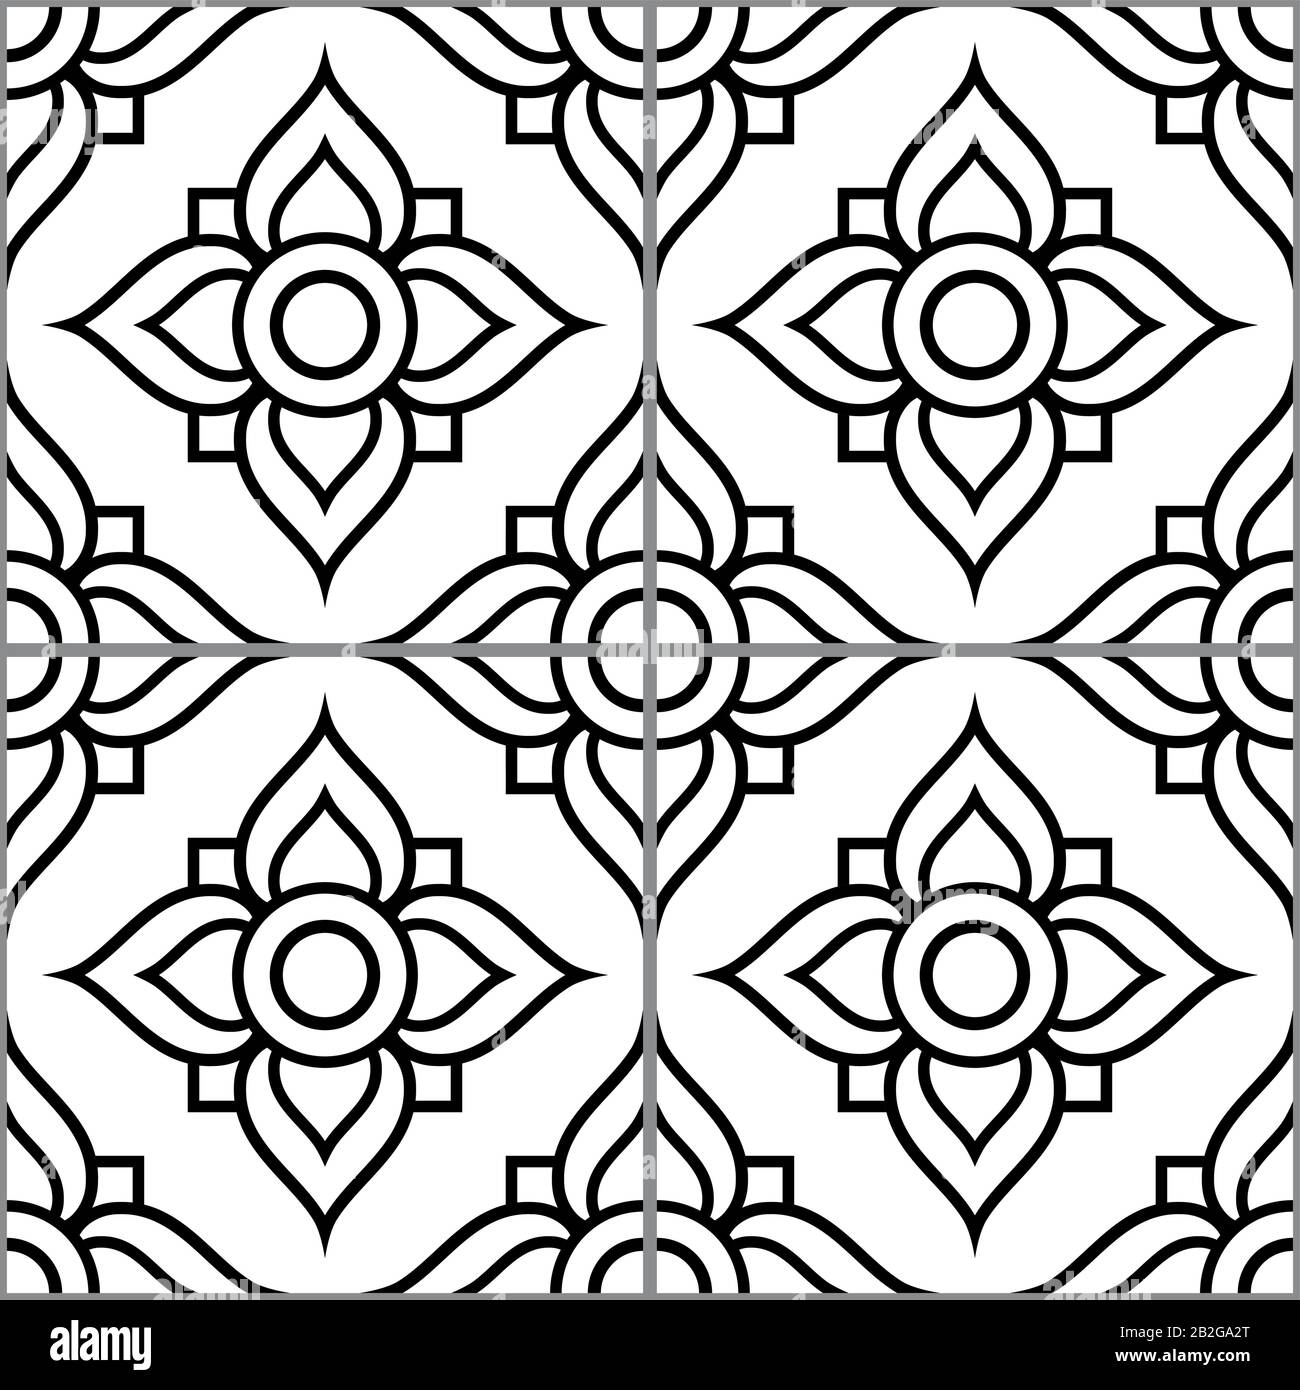 Hand drawing decorative tile pattern italian Vector Image